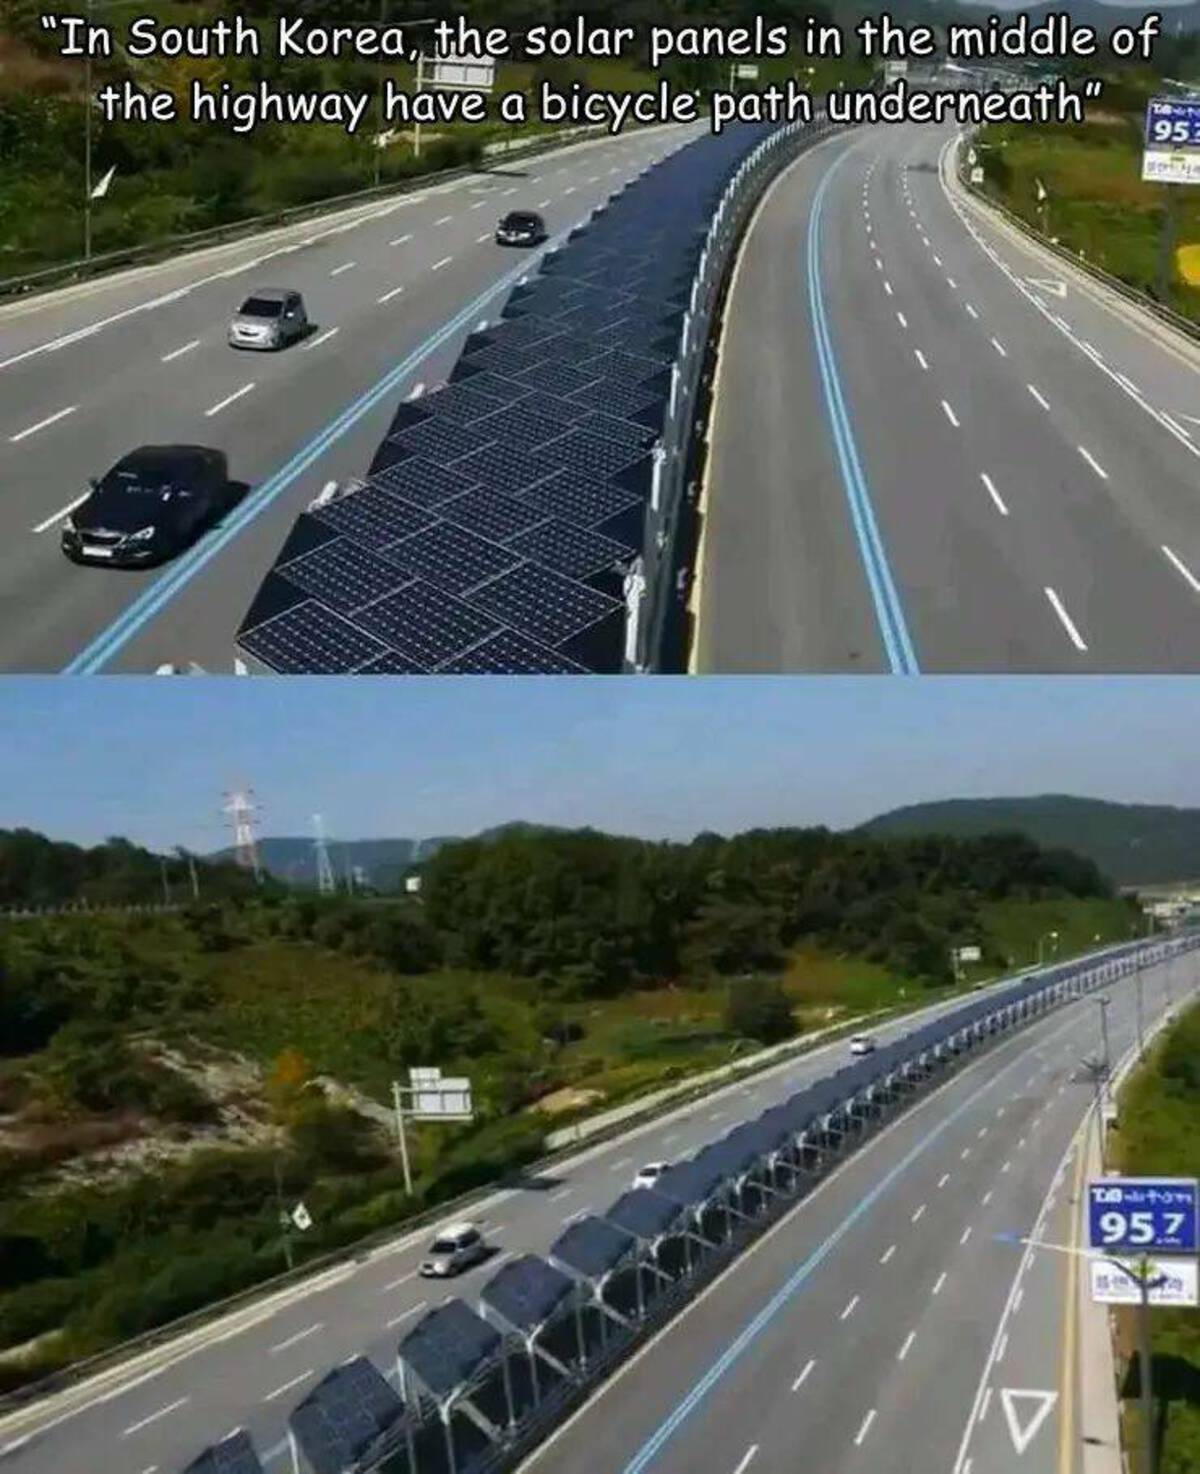 futuristic highway - "In South Korea, the solar panels in the middle of the highway have a bicycle path underneath" 953 Tom 95.7